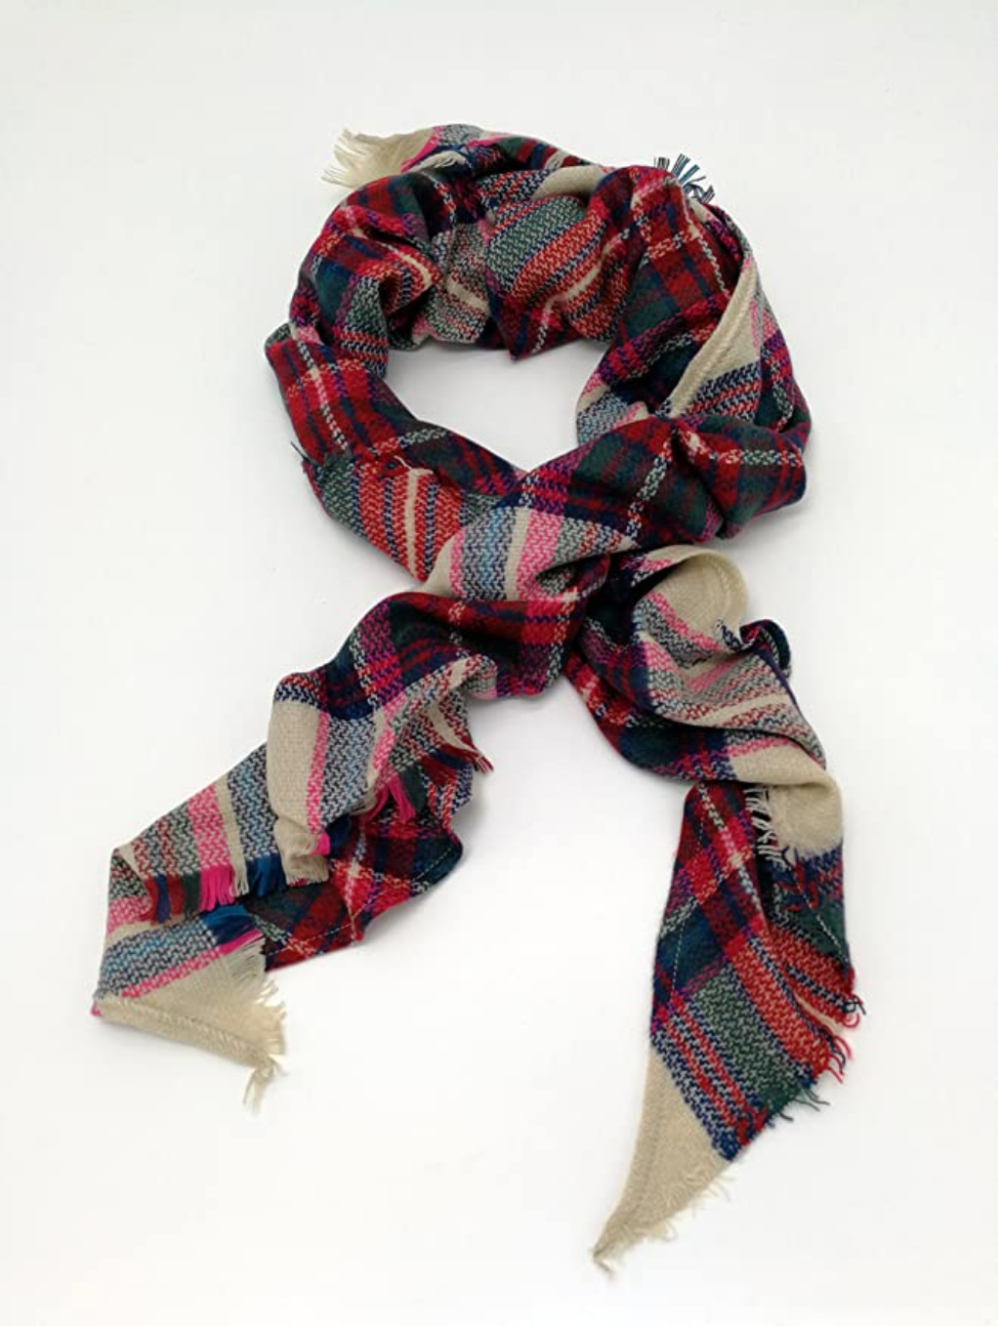 Wander Agio Bestselling Scarf Starts at $13 and Feels Like Cashmere